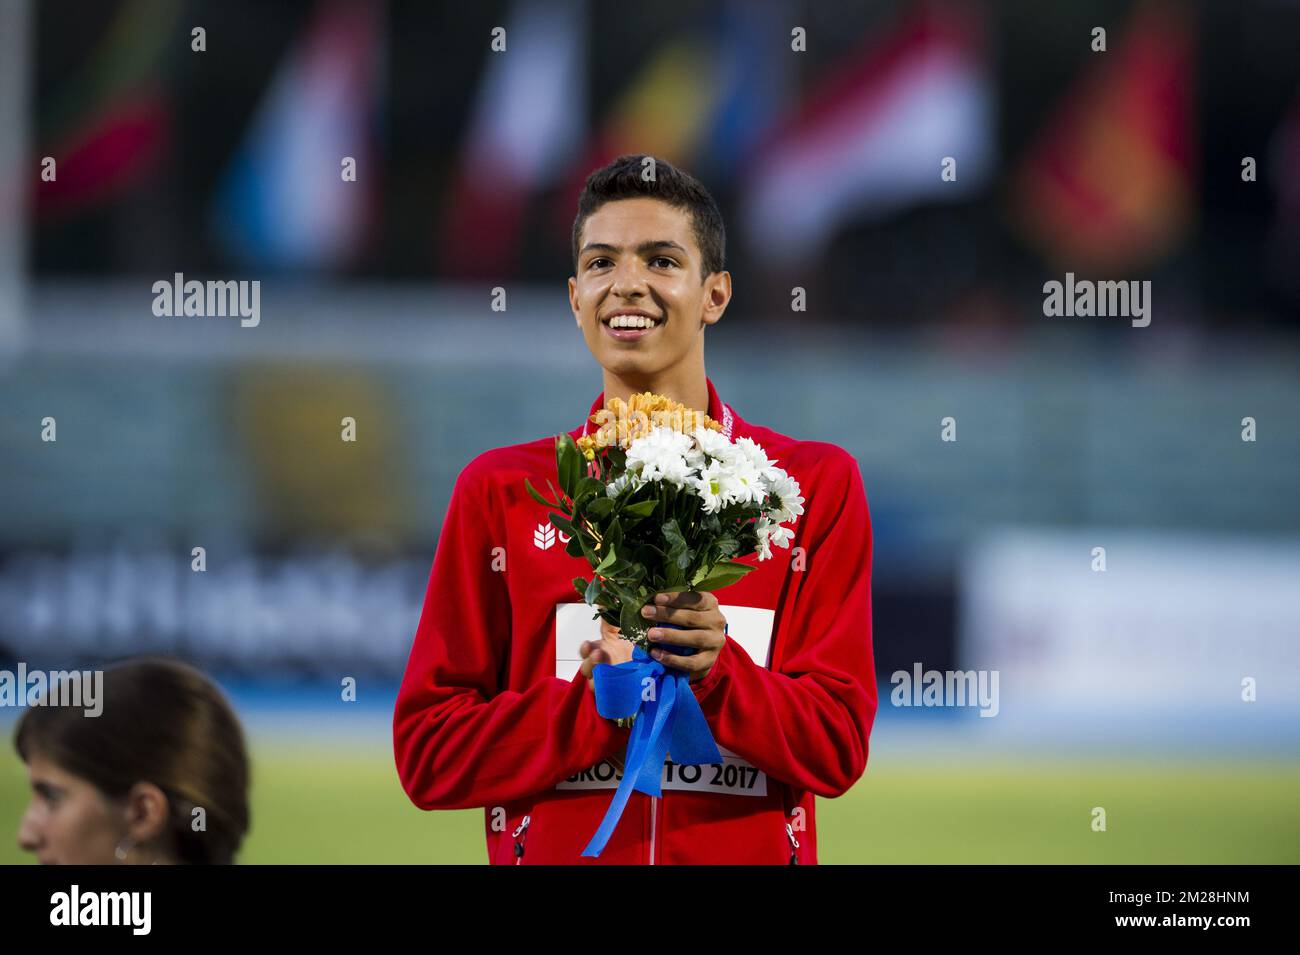 Belgian Jonathan Sacoor celebrate on the podium after on the third day of the U20 European Championships Athletics, in Grosseto, Italy, Saturday 22 July 2017. This year, the biyearly Championships for athletes who are 19 years old or younger are taking place from 20 to 23 July. BELGA PHOTO JASPER JACOBS Stock Photo